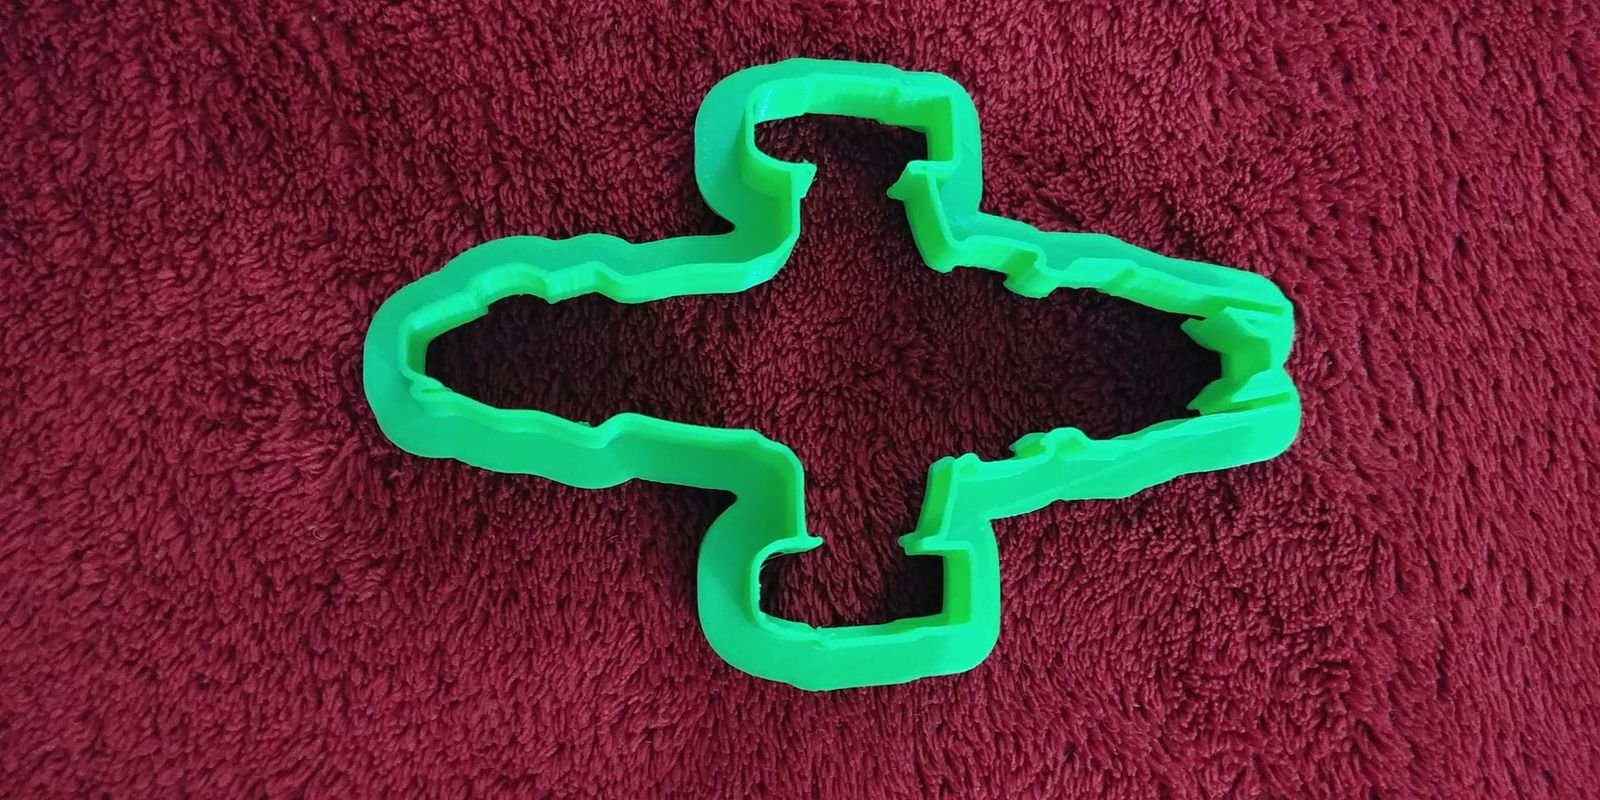 3D Printed Fan Art Cookie Cutter Inspired by Firefly Serenity